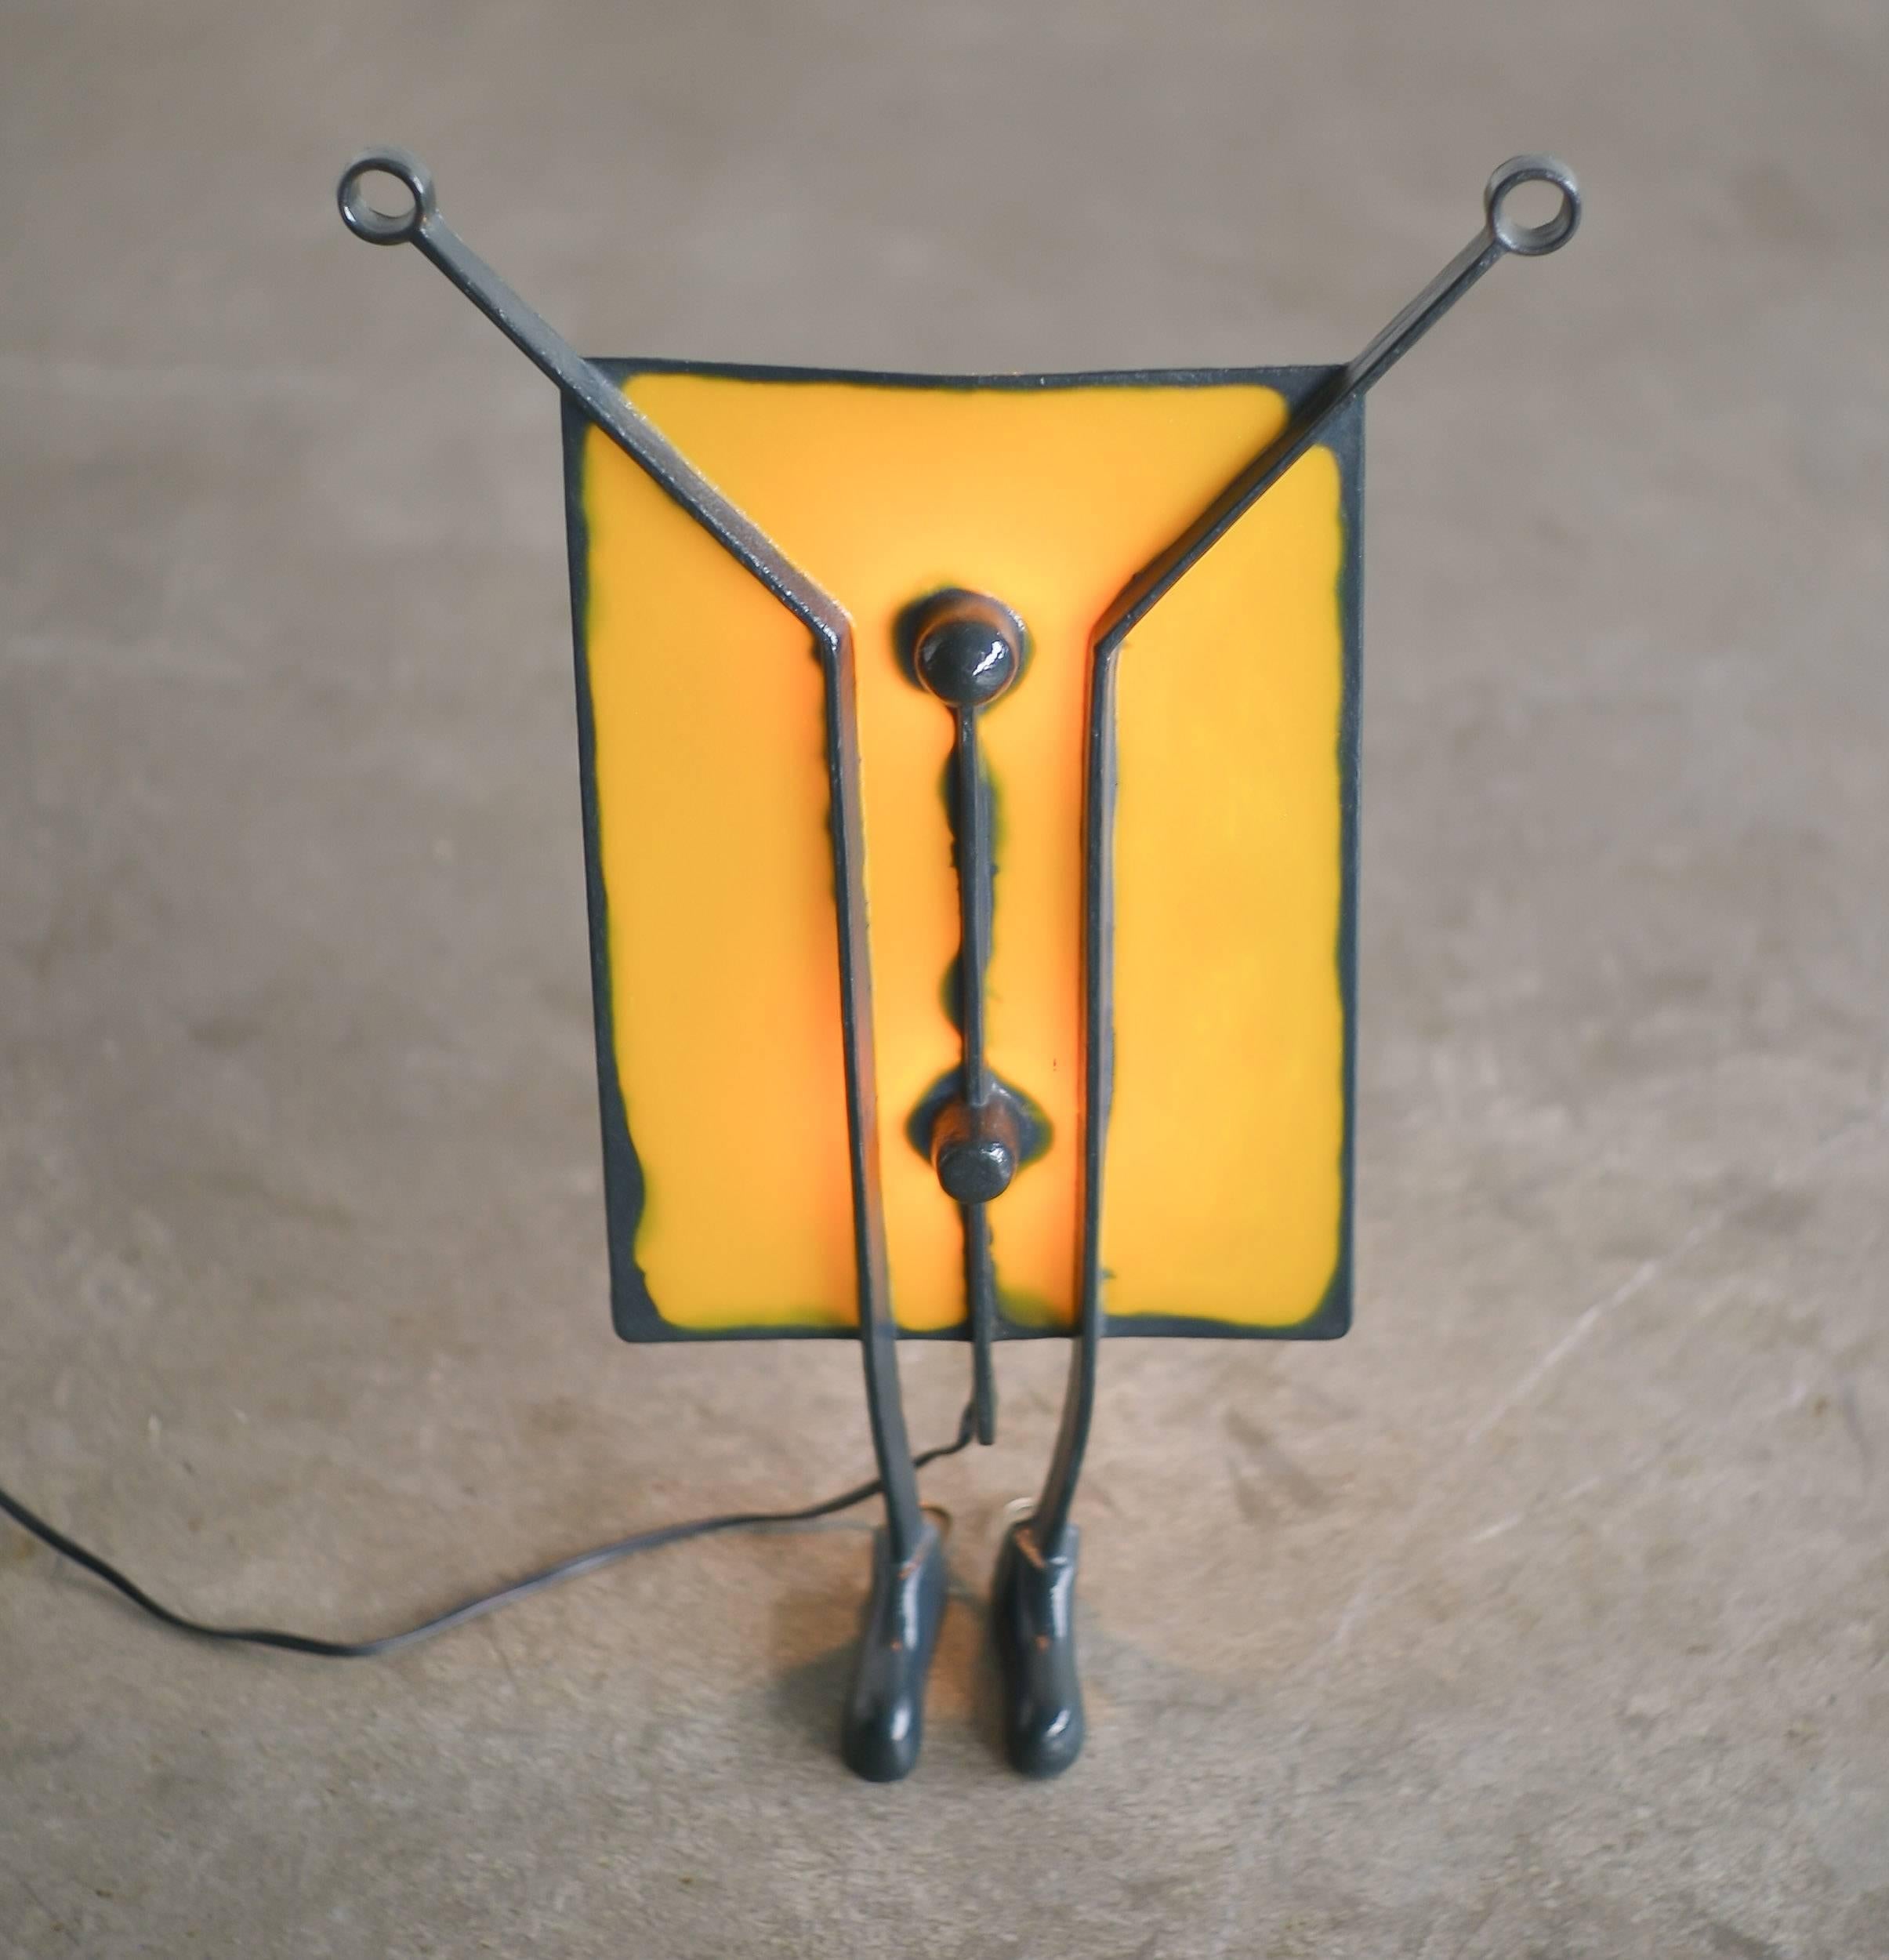 Post-Modern Salvatore Table Lamp Designed in 1995 by Gaetano Pesce